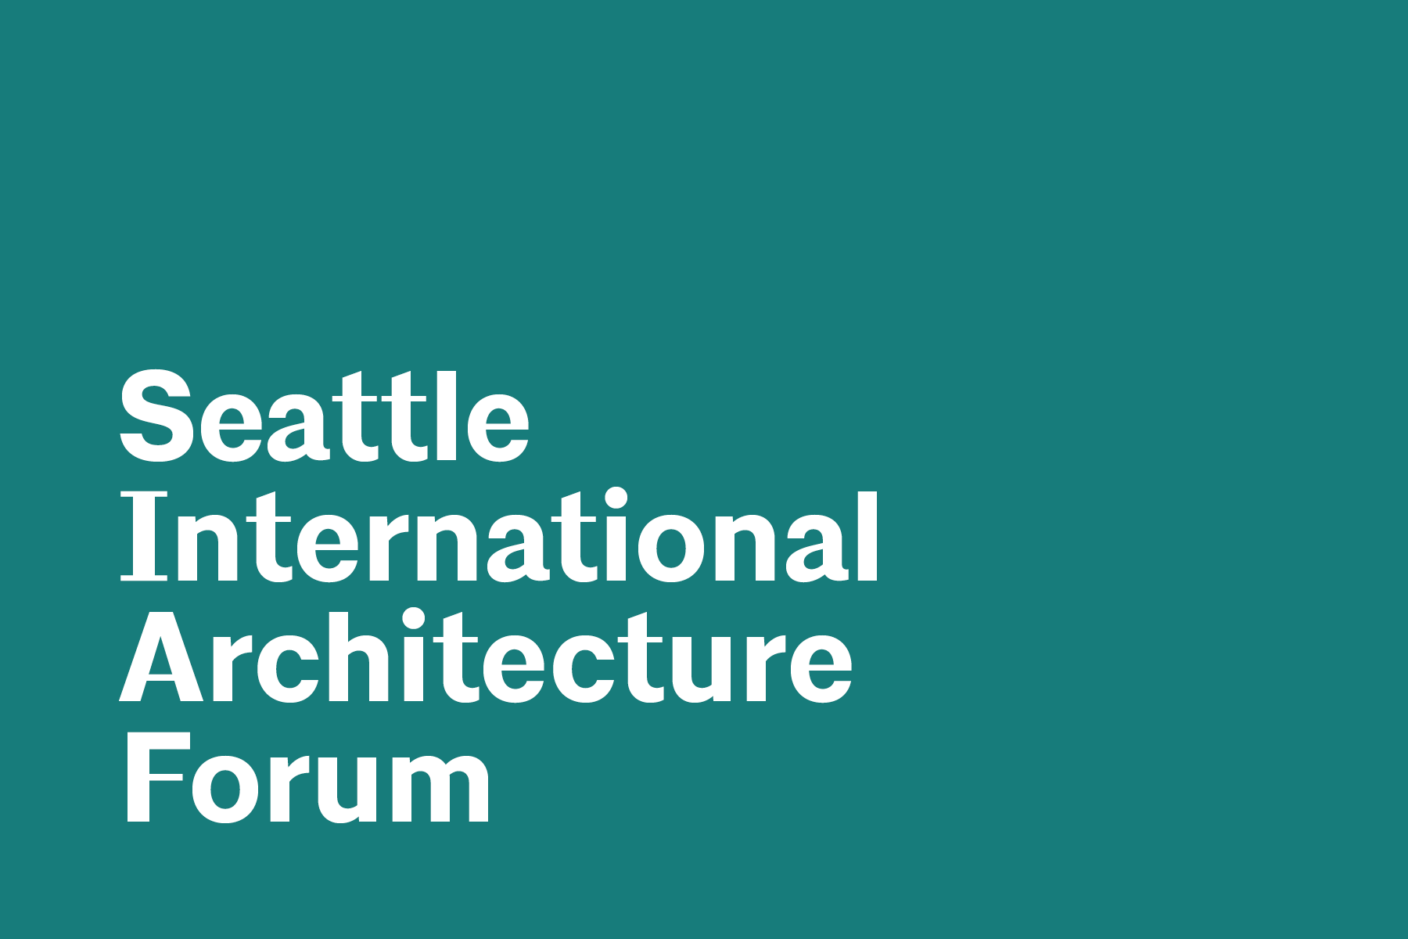 The Seattle International Architecture Forum (SIAF) broadens cross-cultural horizons, provides mentoring and educational opportunities, and inspires awareness of international architectural practice.